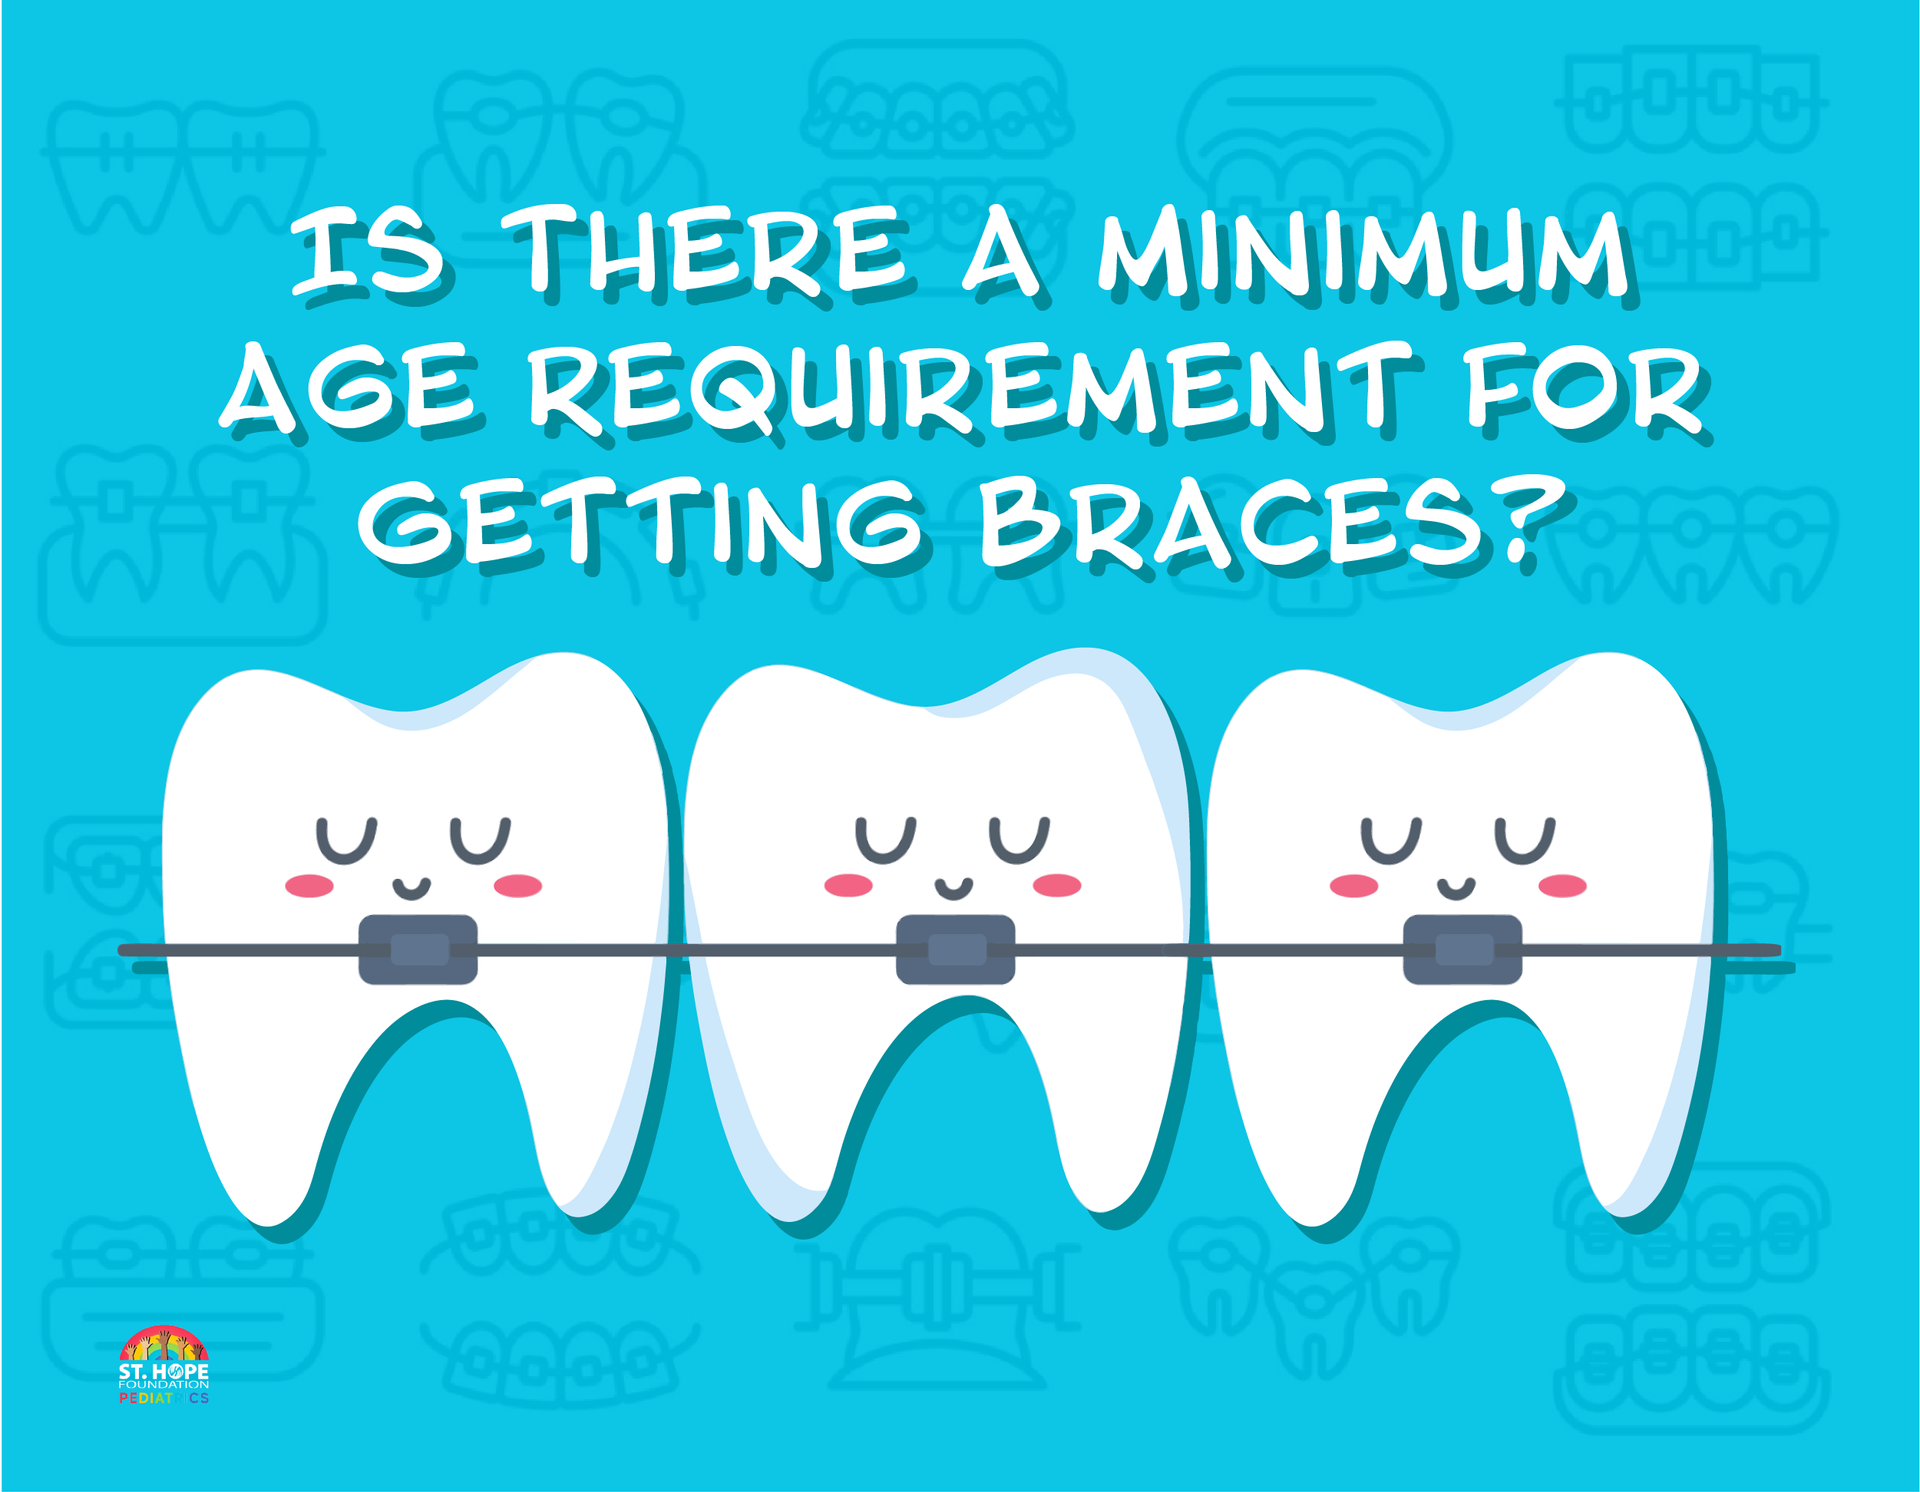 is there an age minimum to get braces?